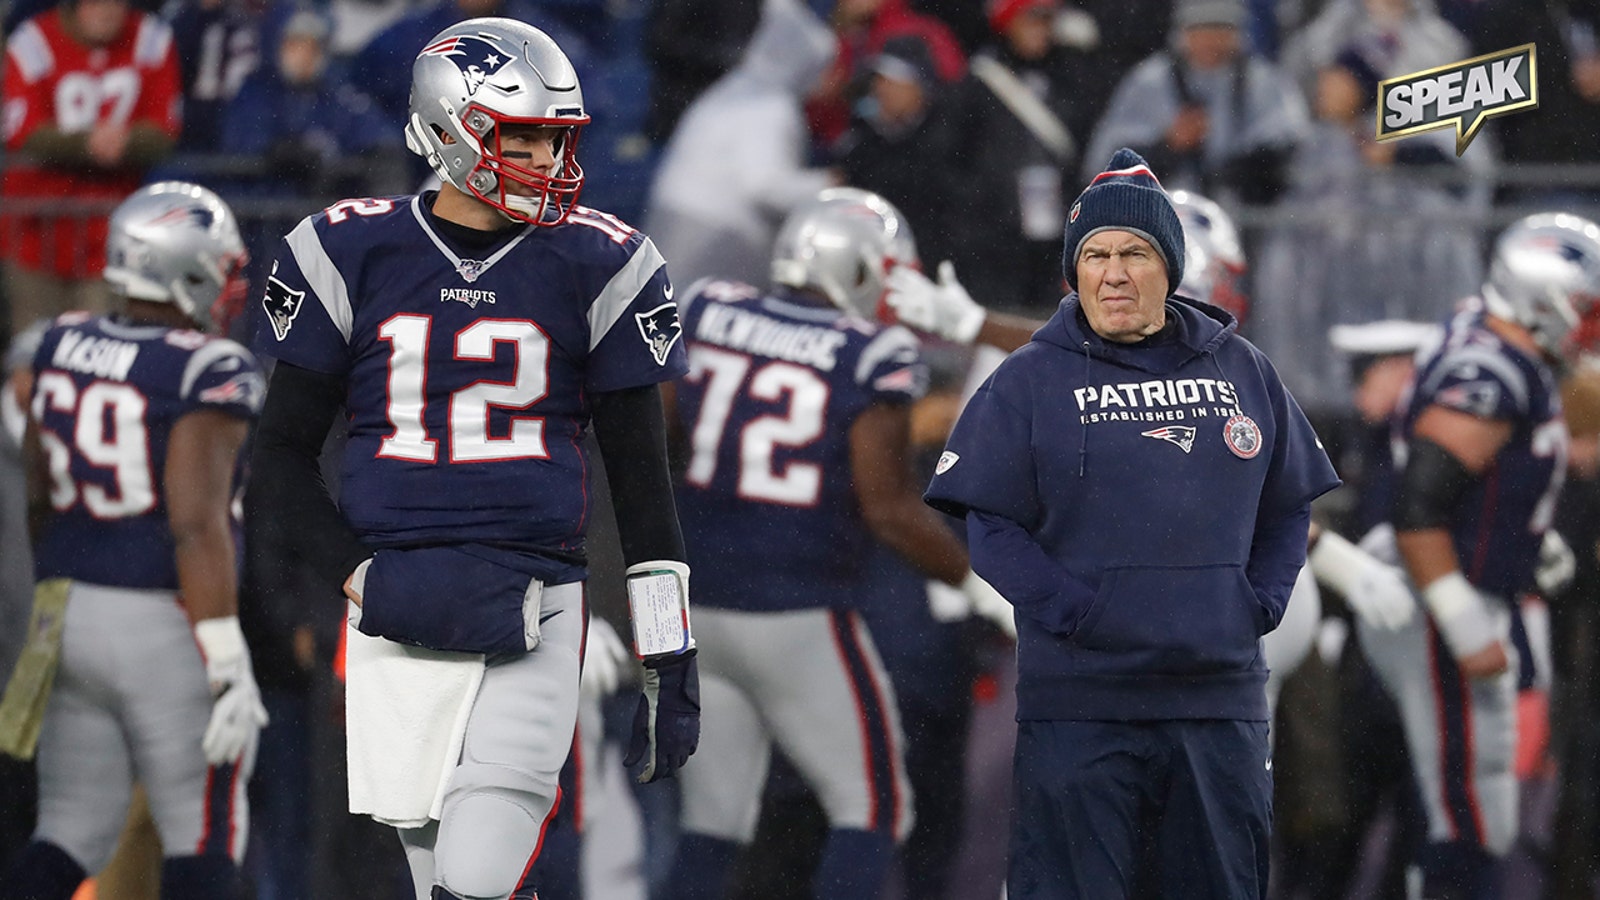 What a 23-23 record post-Tom Brady says about Bill Belichick